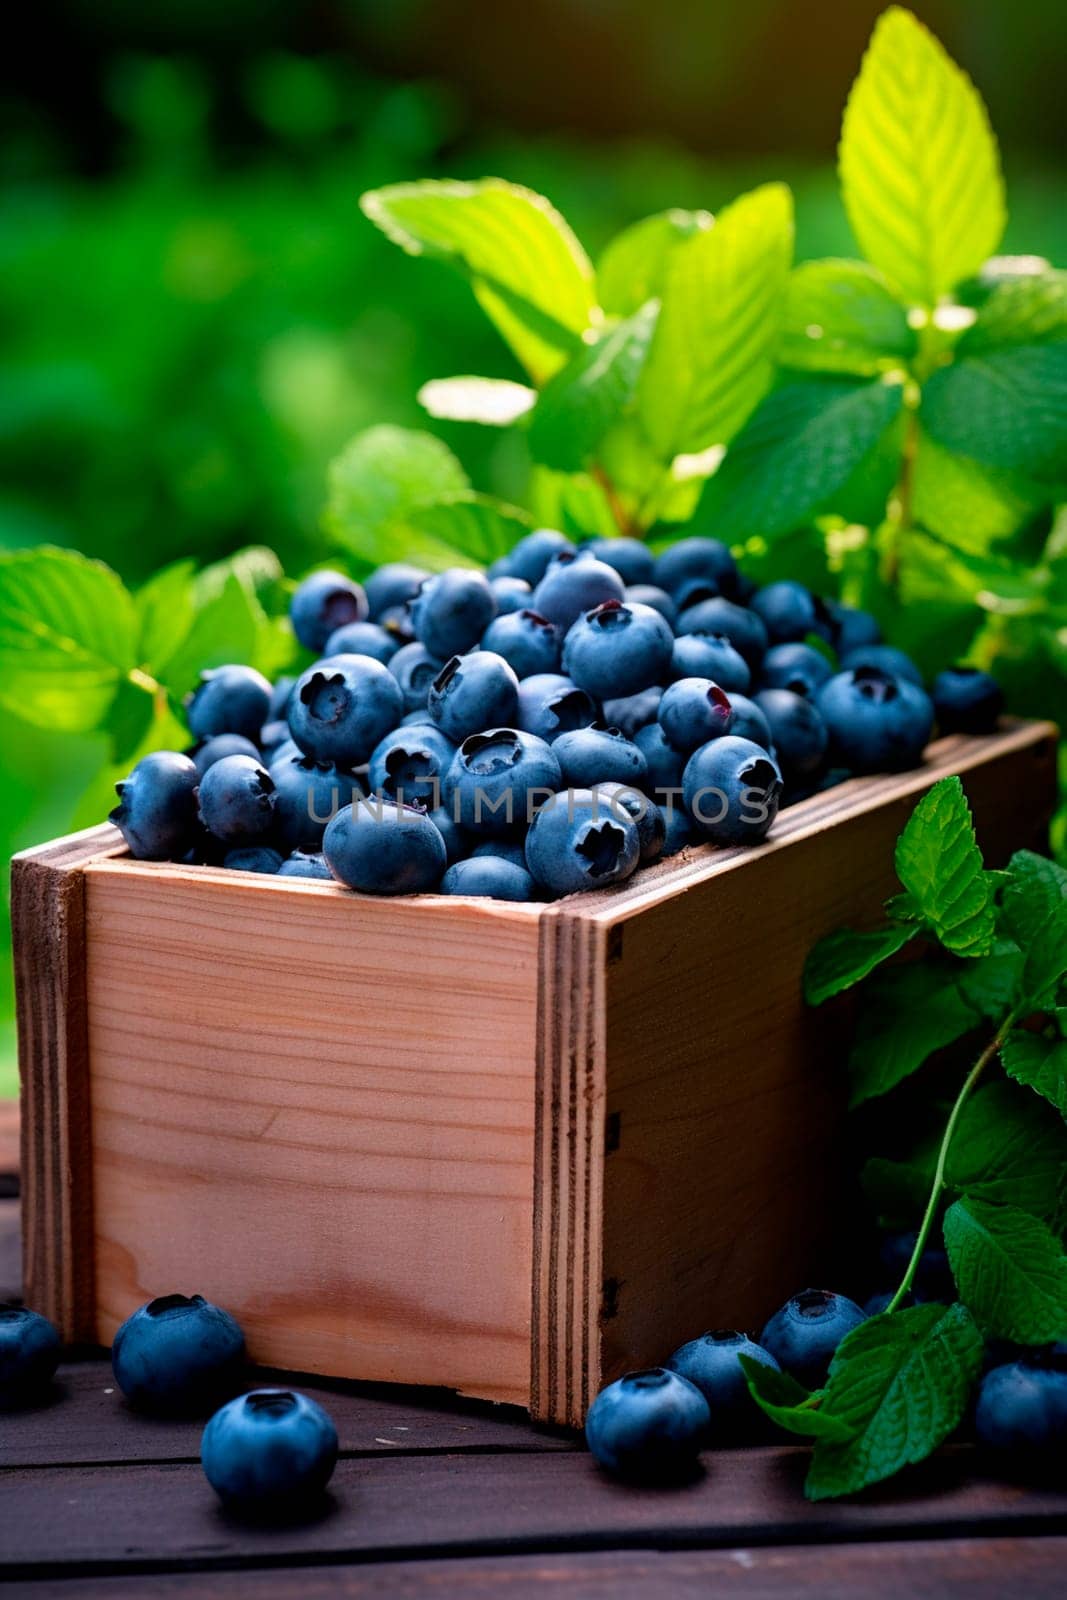 Blueberry harvest in a box in the garden. Selective focus. Food.